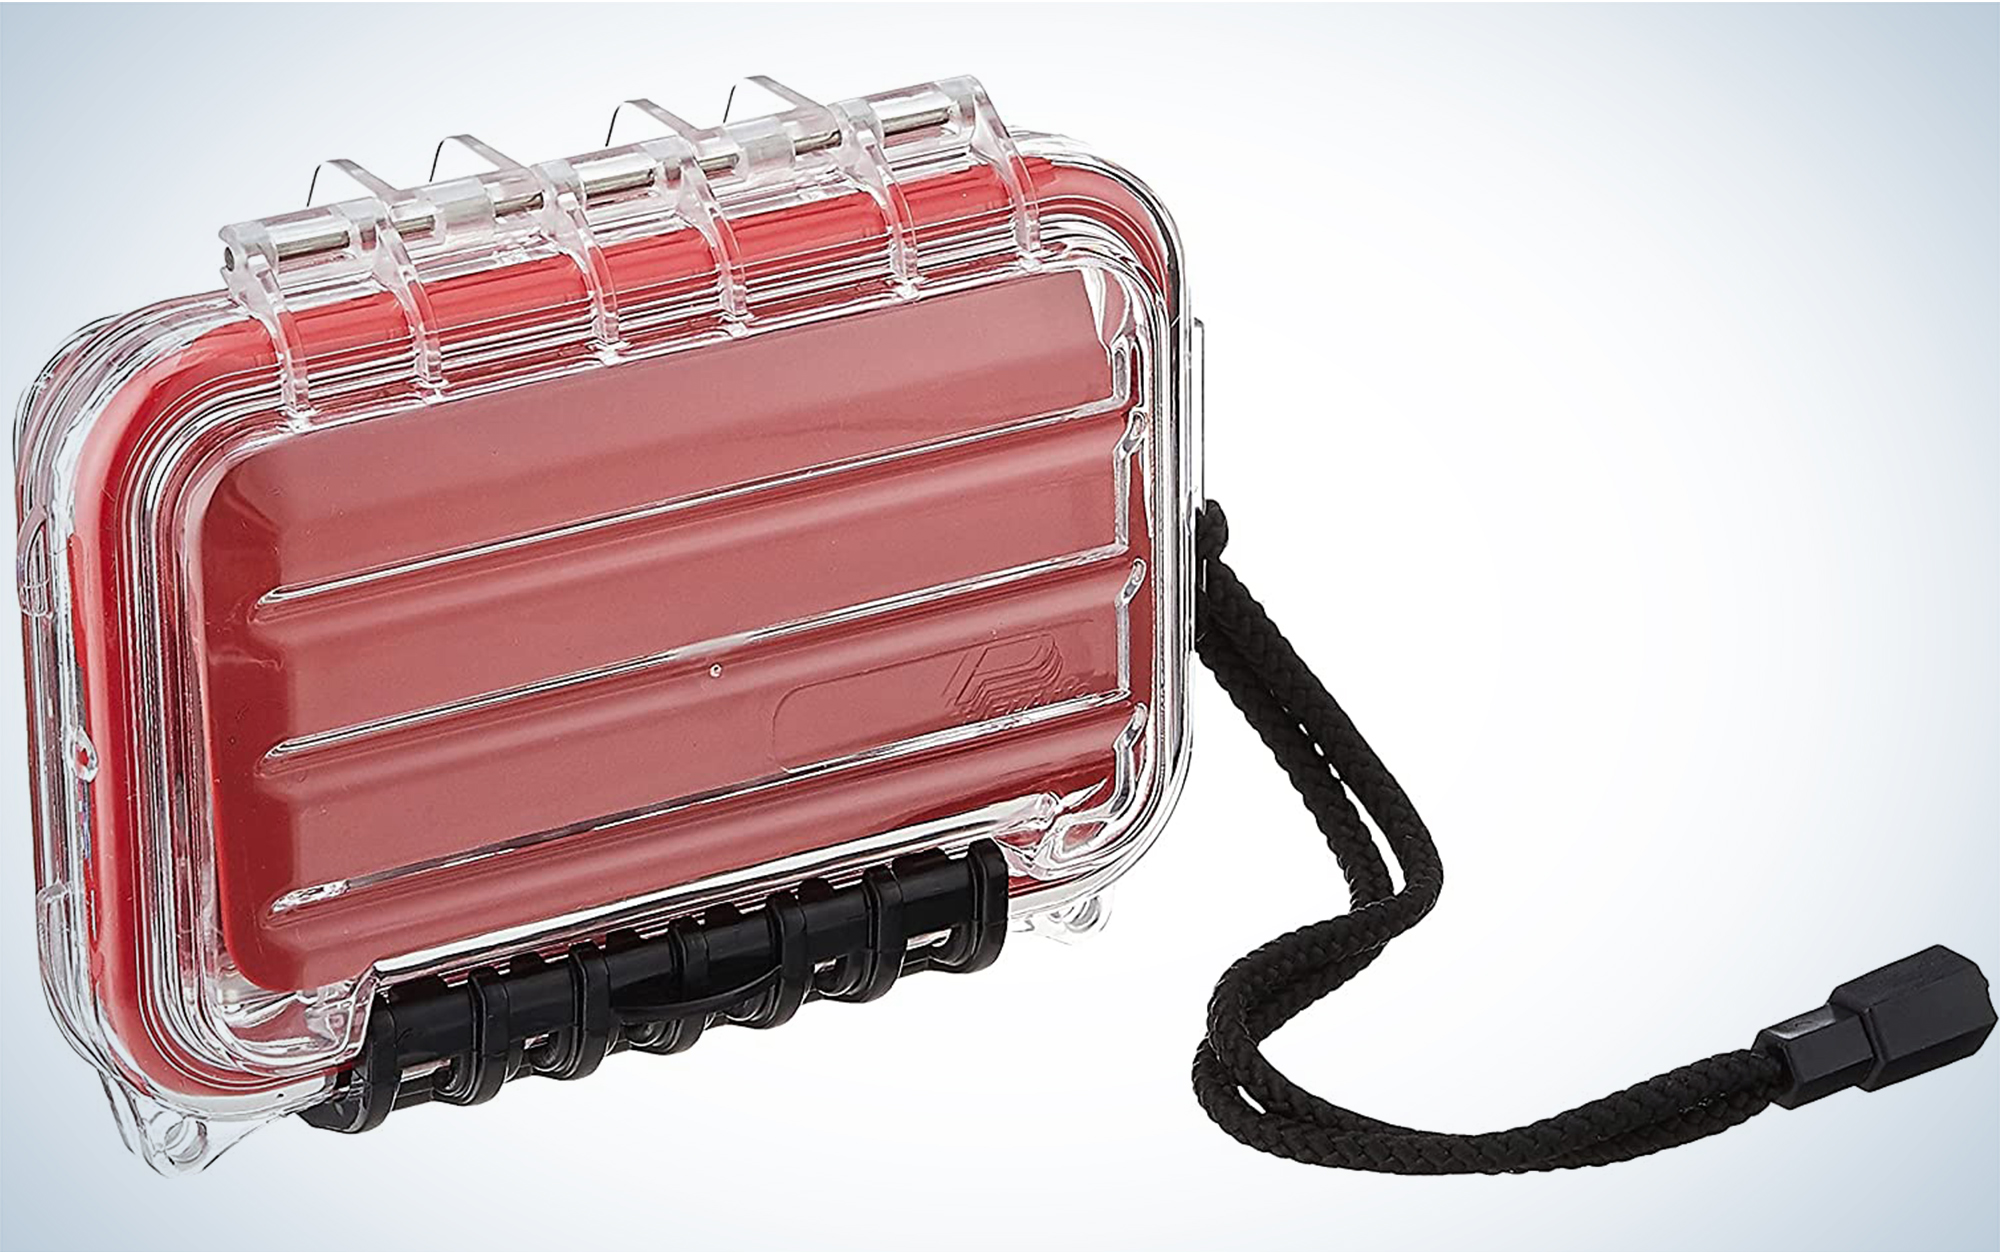 The Plano Waterproof Case is one of the best kayak fishing accessories.